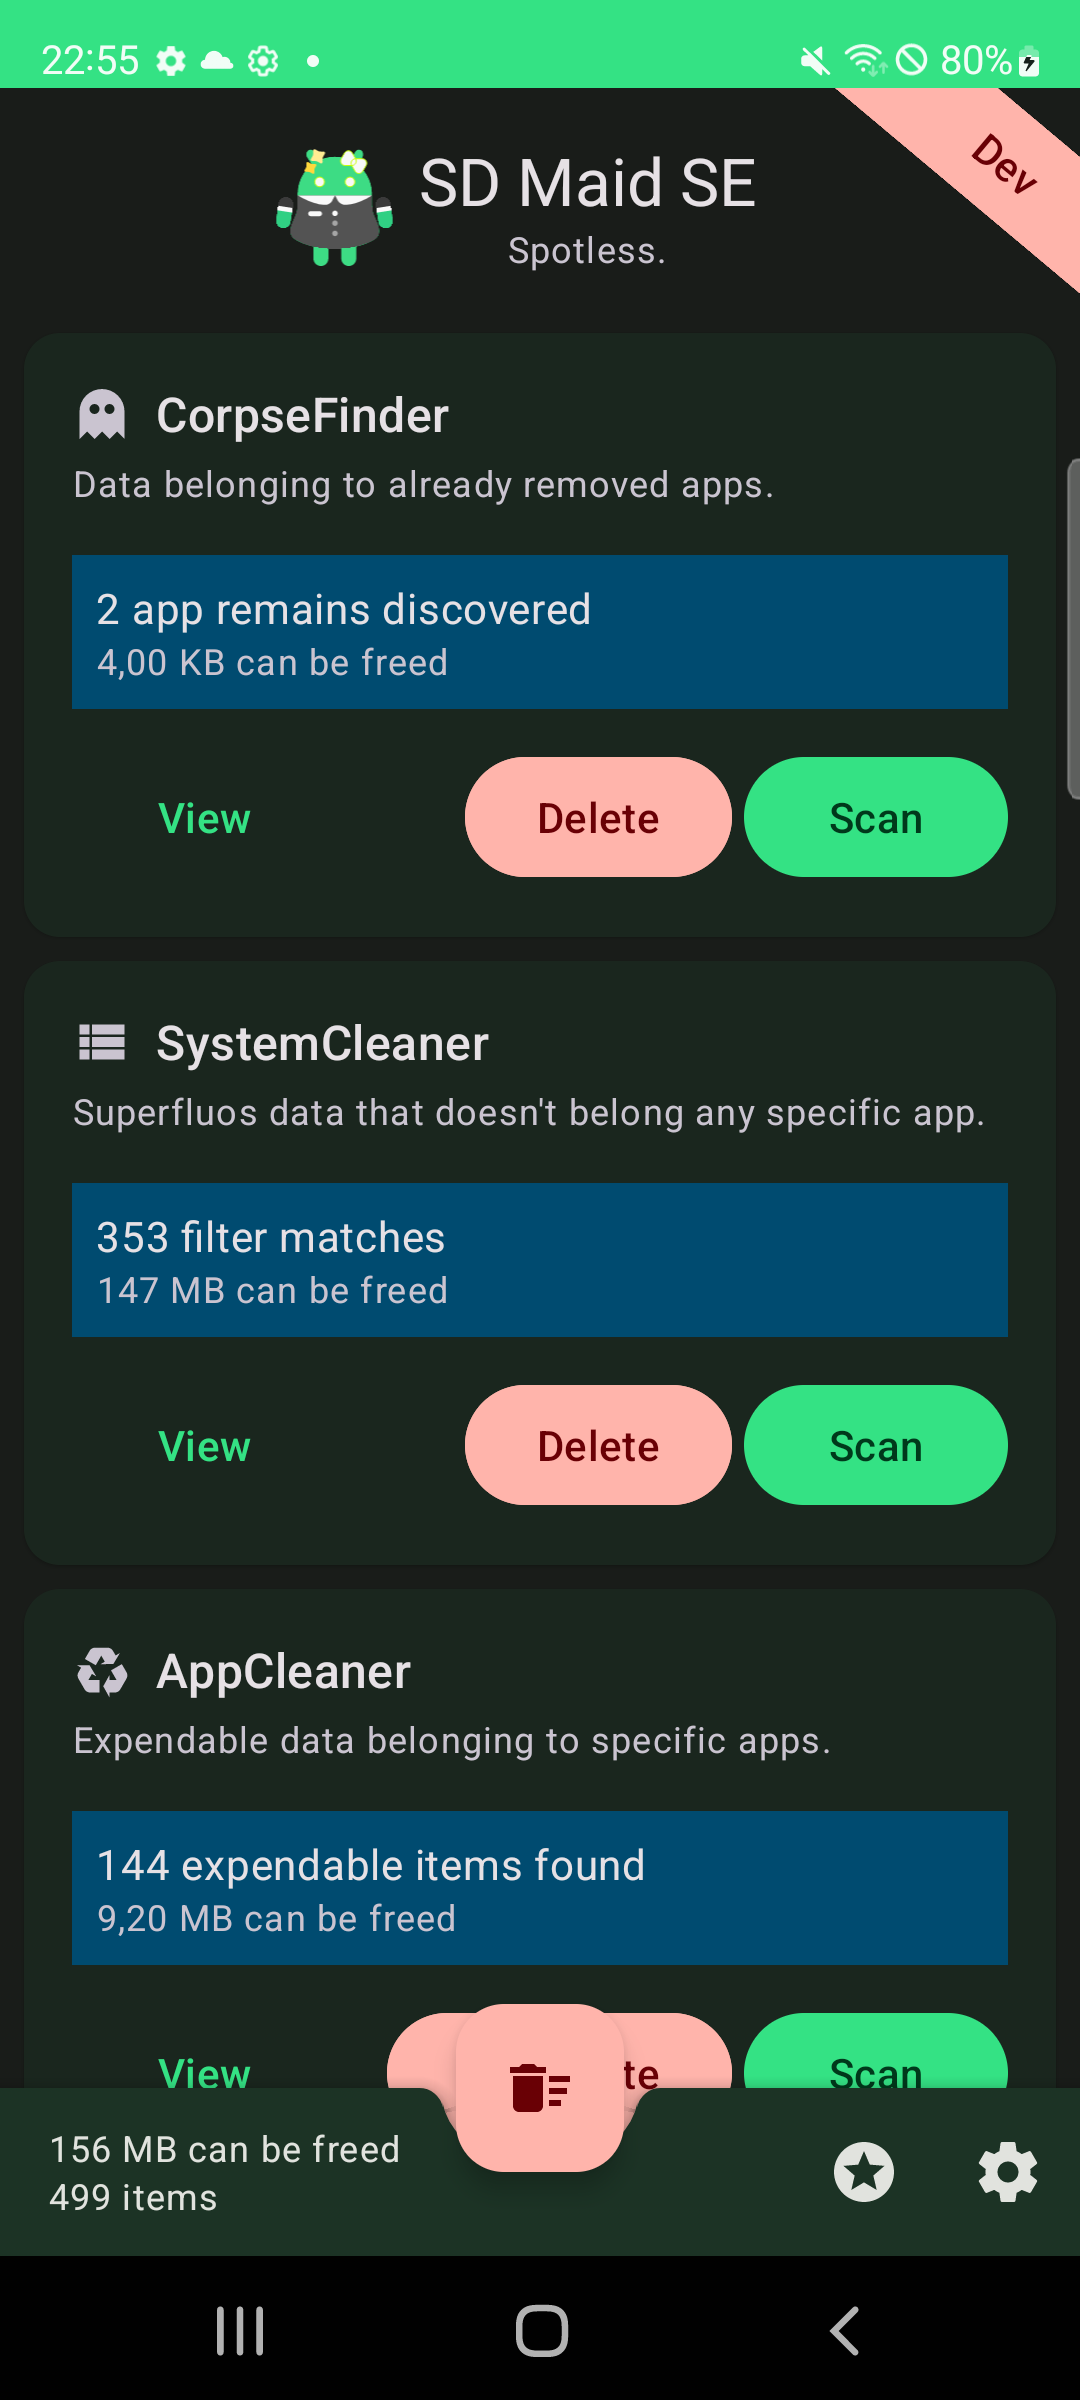 SD Maid SE - System Cleaner